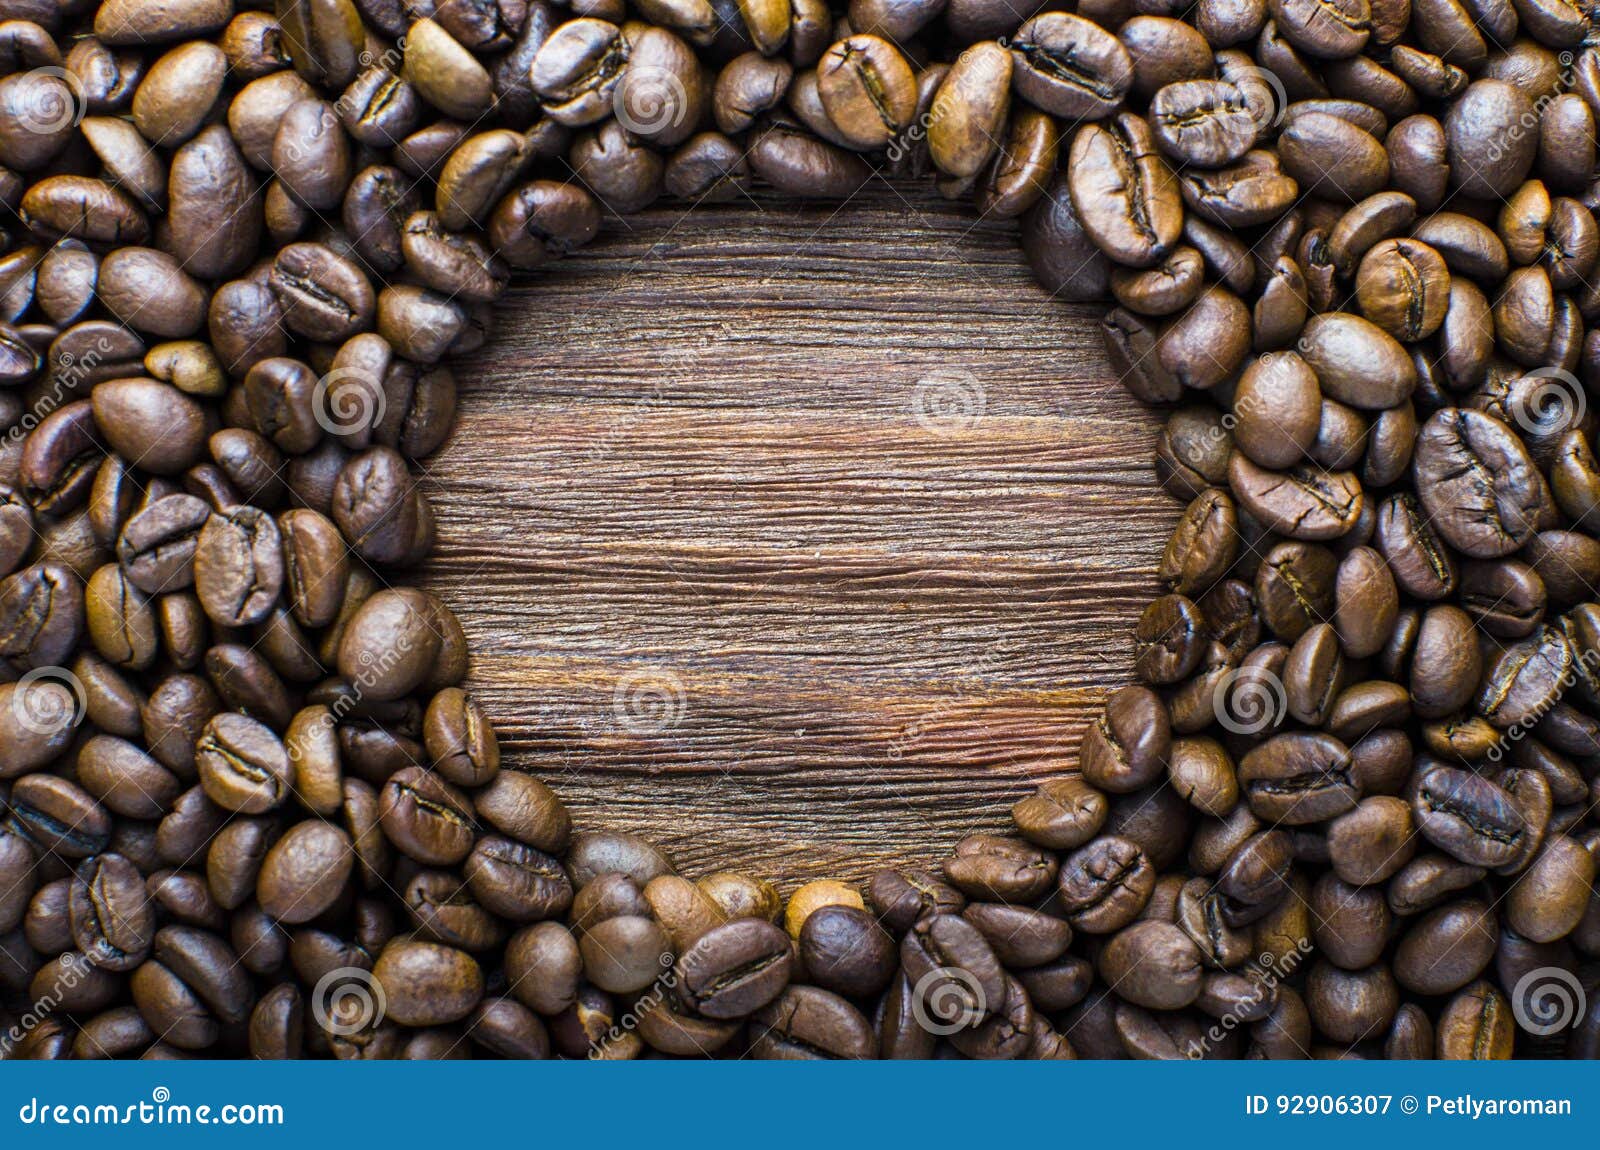 oval of coffee beans on a wooden fone